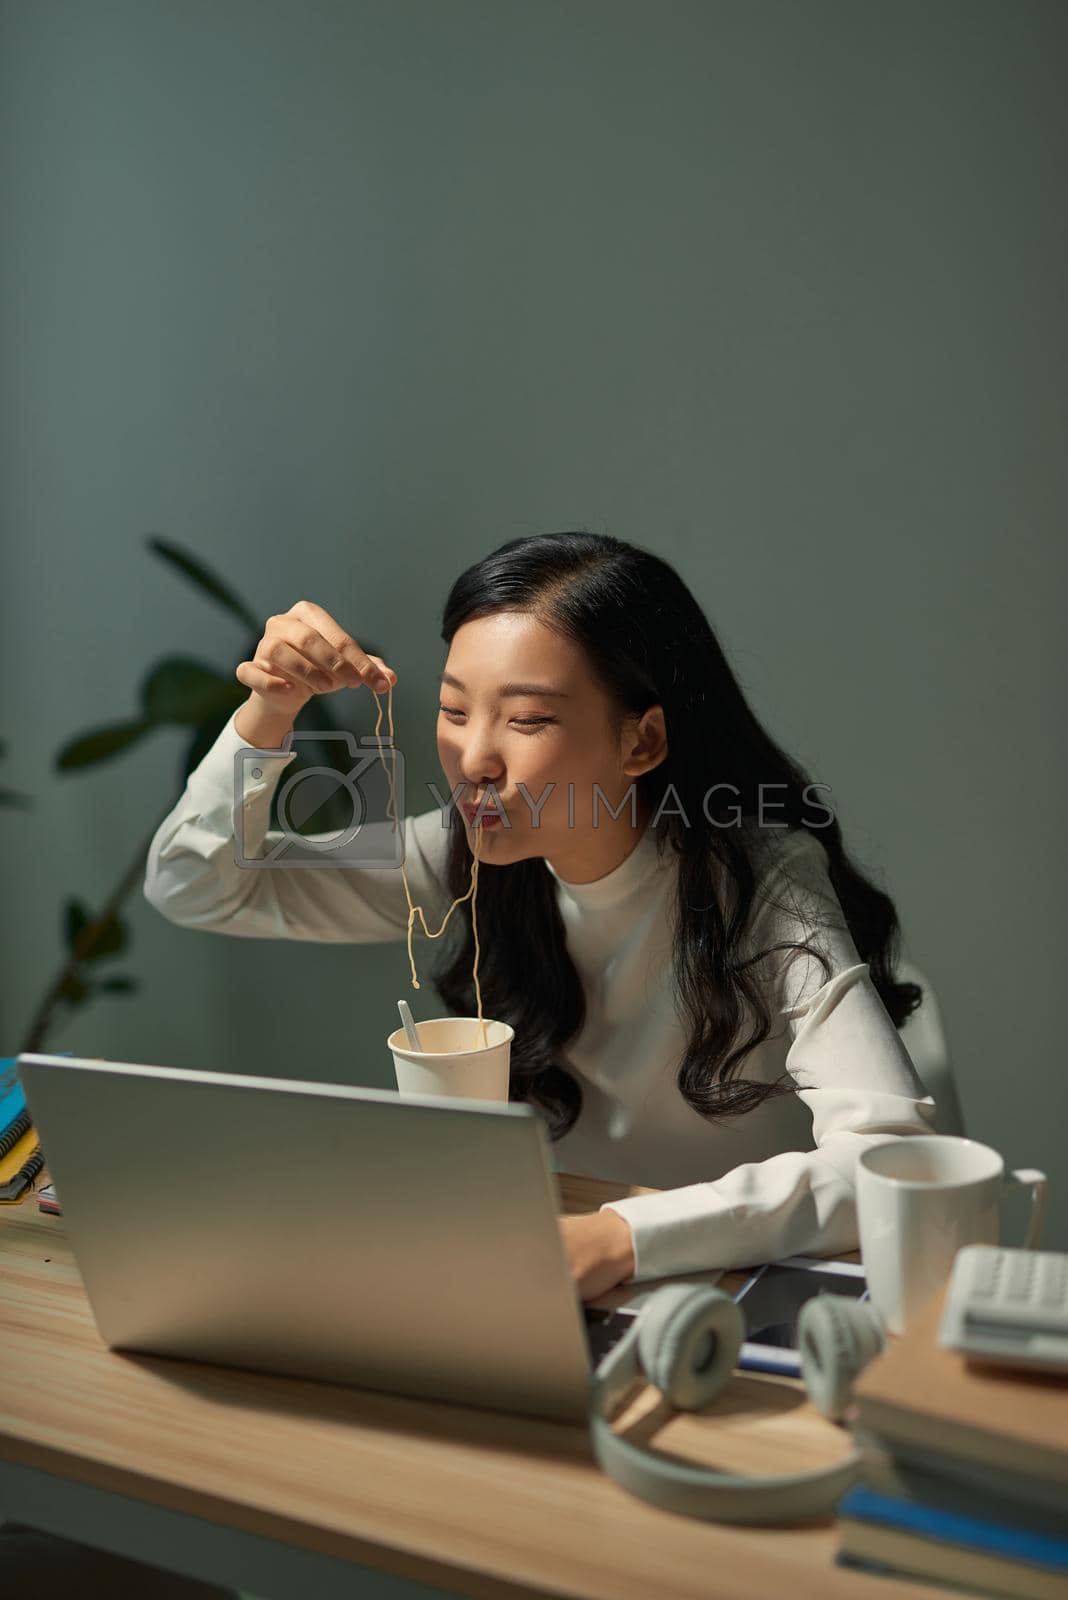 Royalty free image of Hungry student eating noodle while learning at home by makidotvn